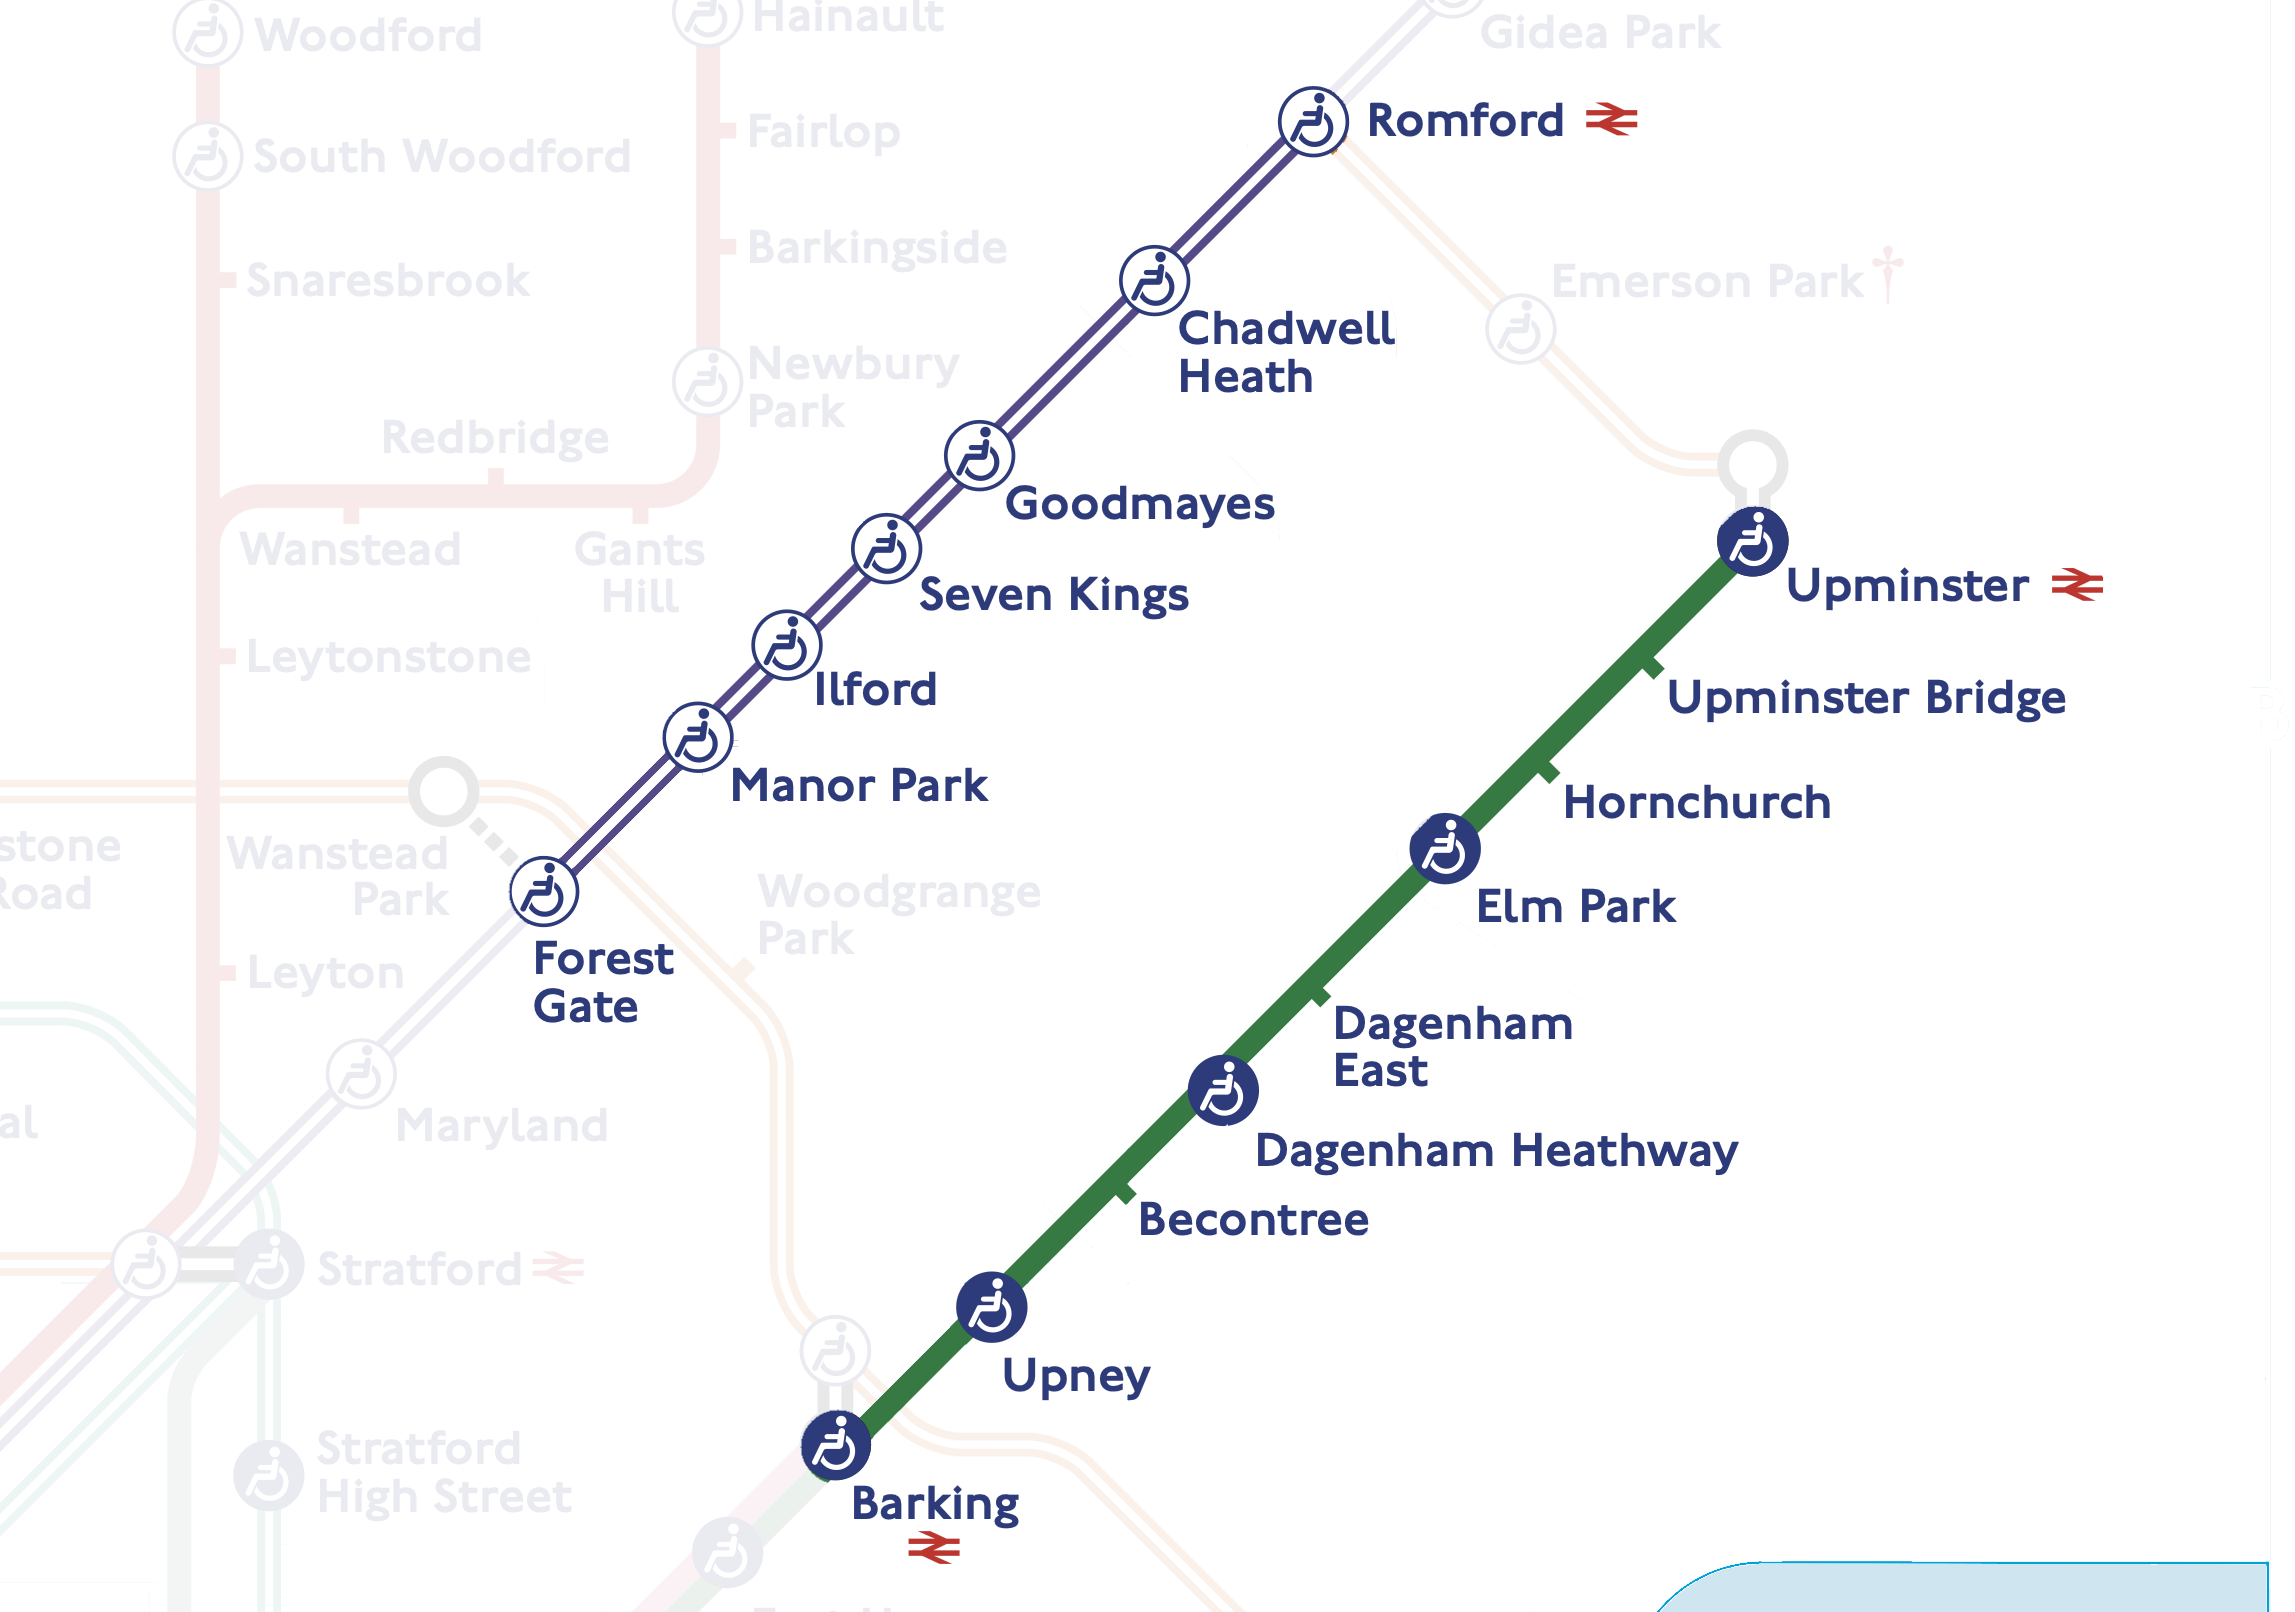 I went to Upminster from Barking, and then walked from Romford to Forest Gate